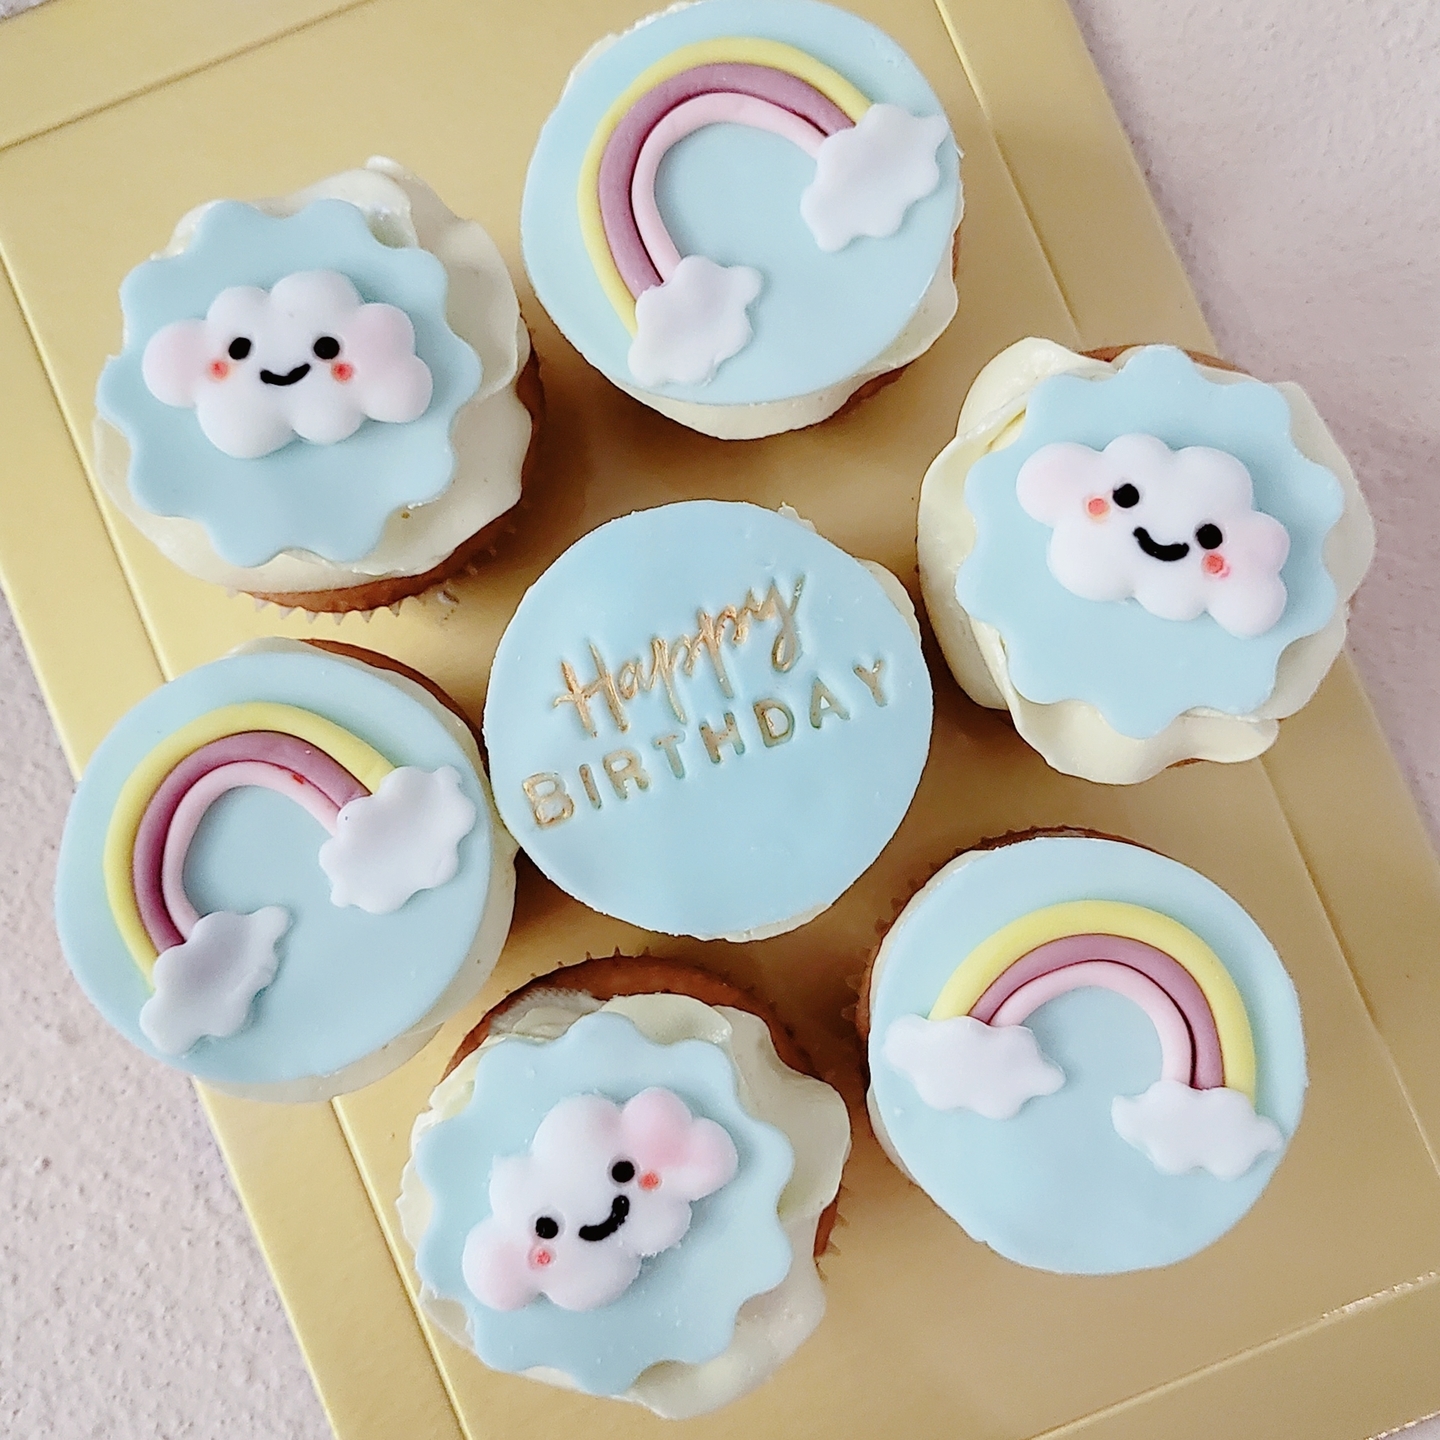 Rainbow & Clouds Themed Cupcakes